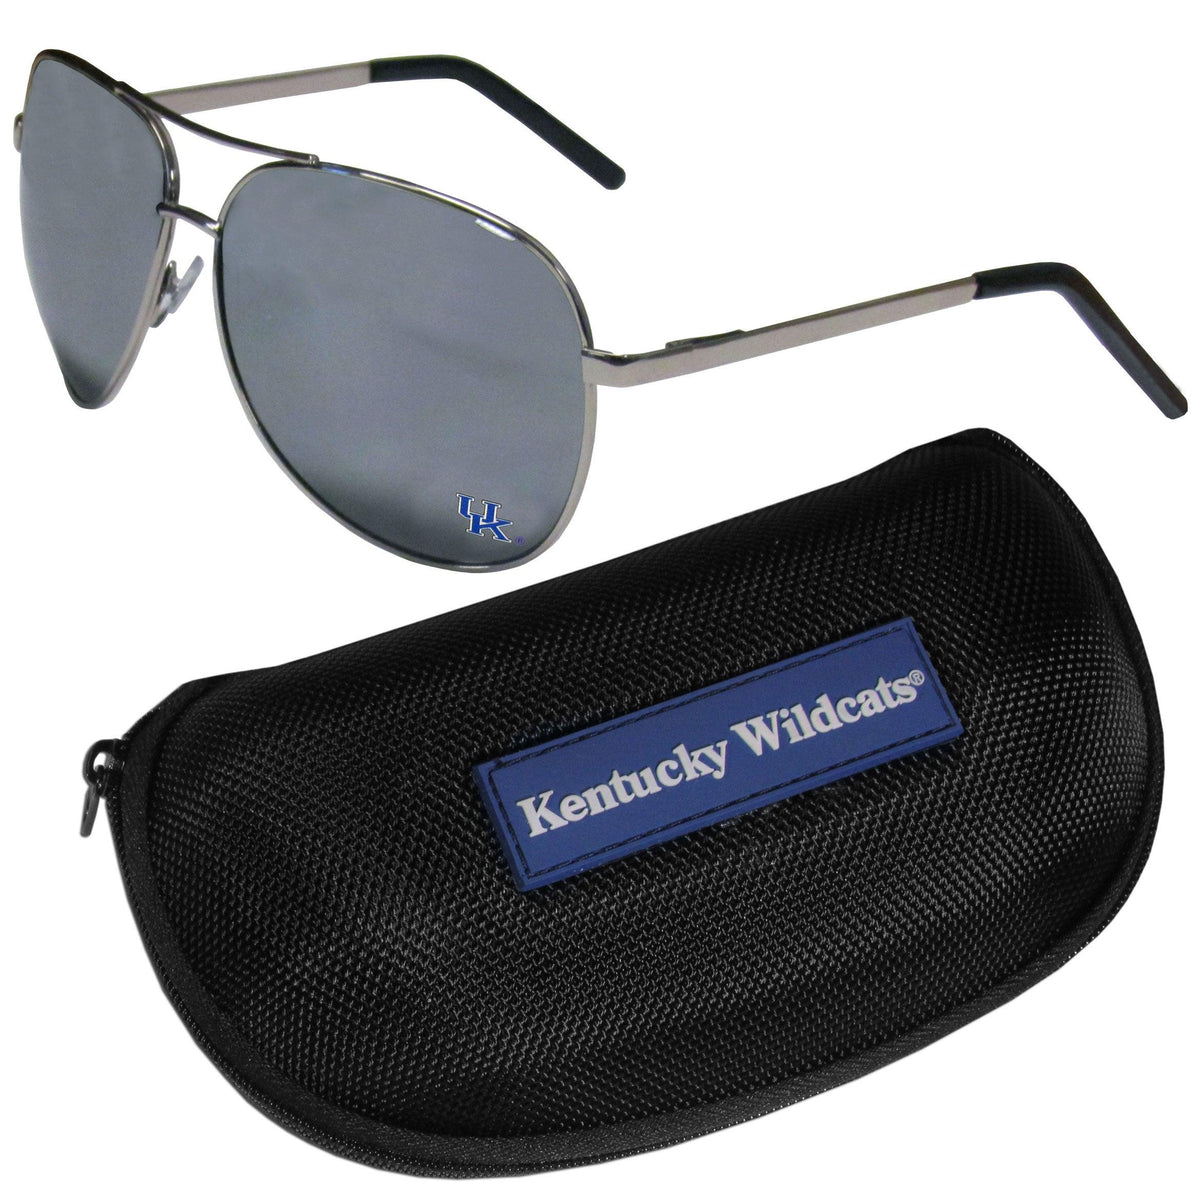 Kentucky Wildcats Aviator Sunglasses and Zippered Carrying Case - Flyclothing LLC